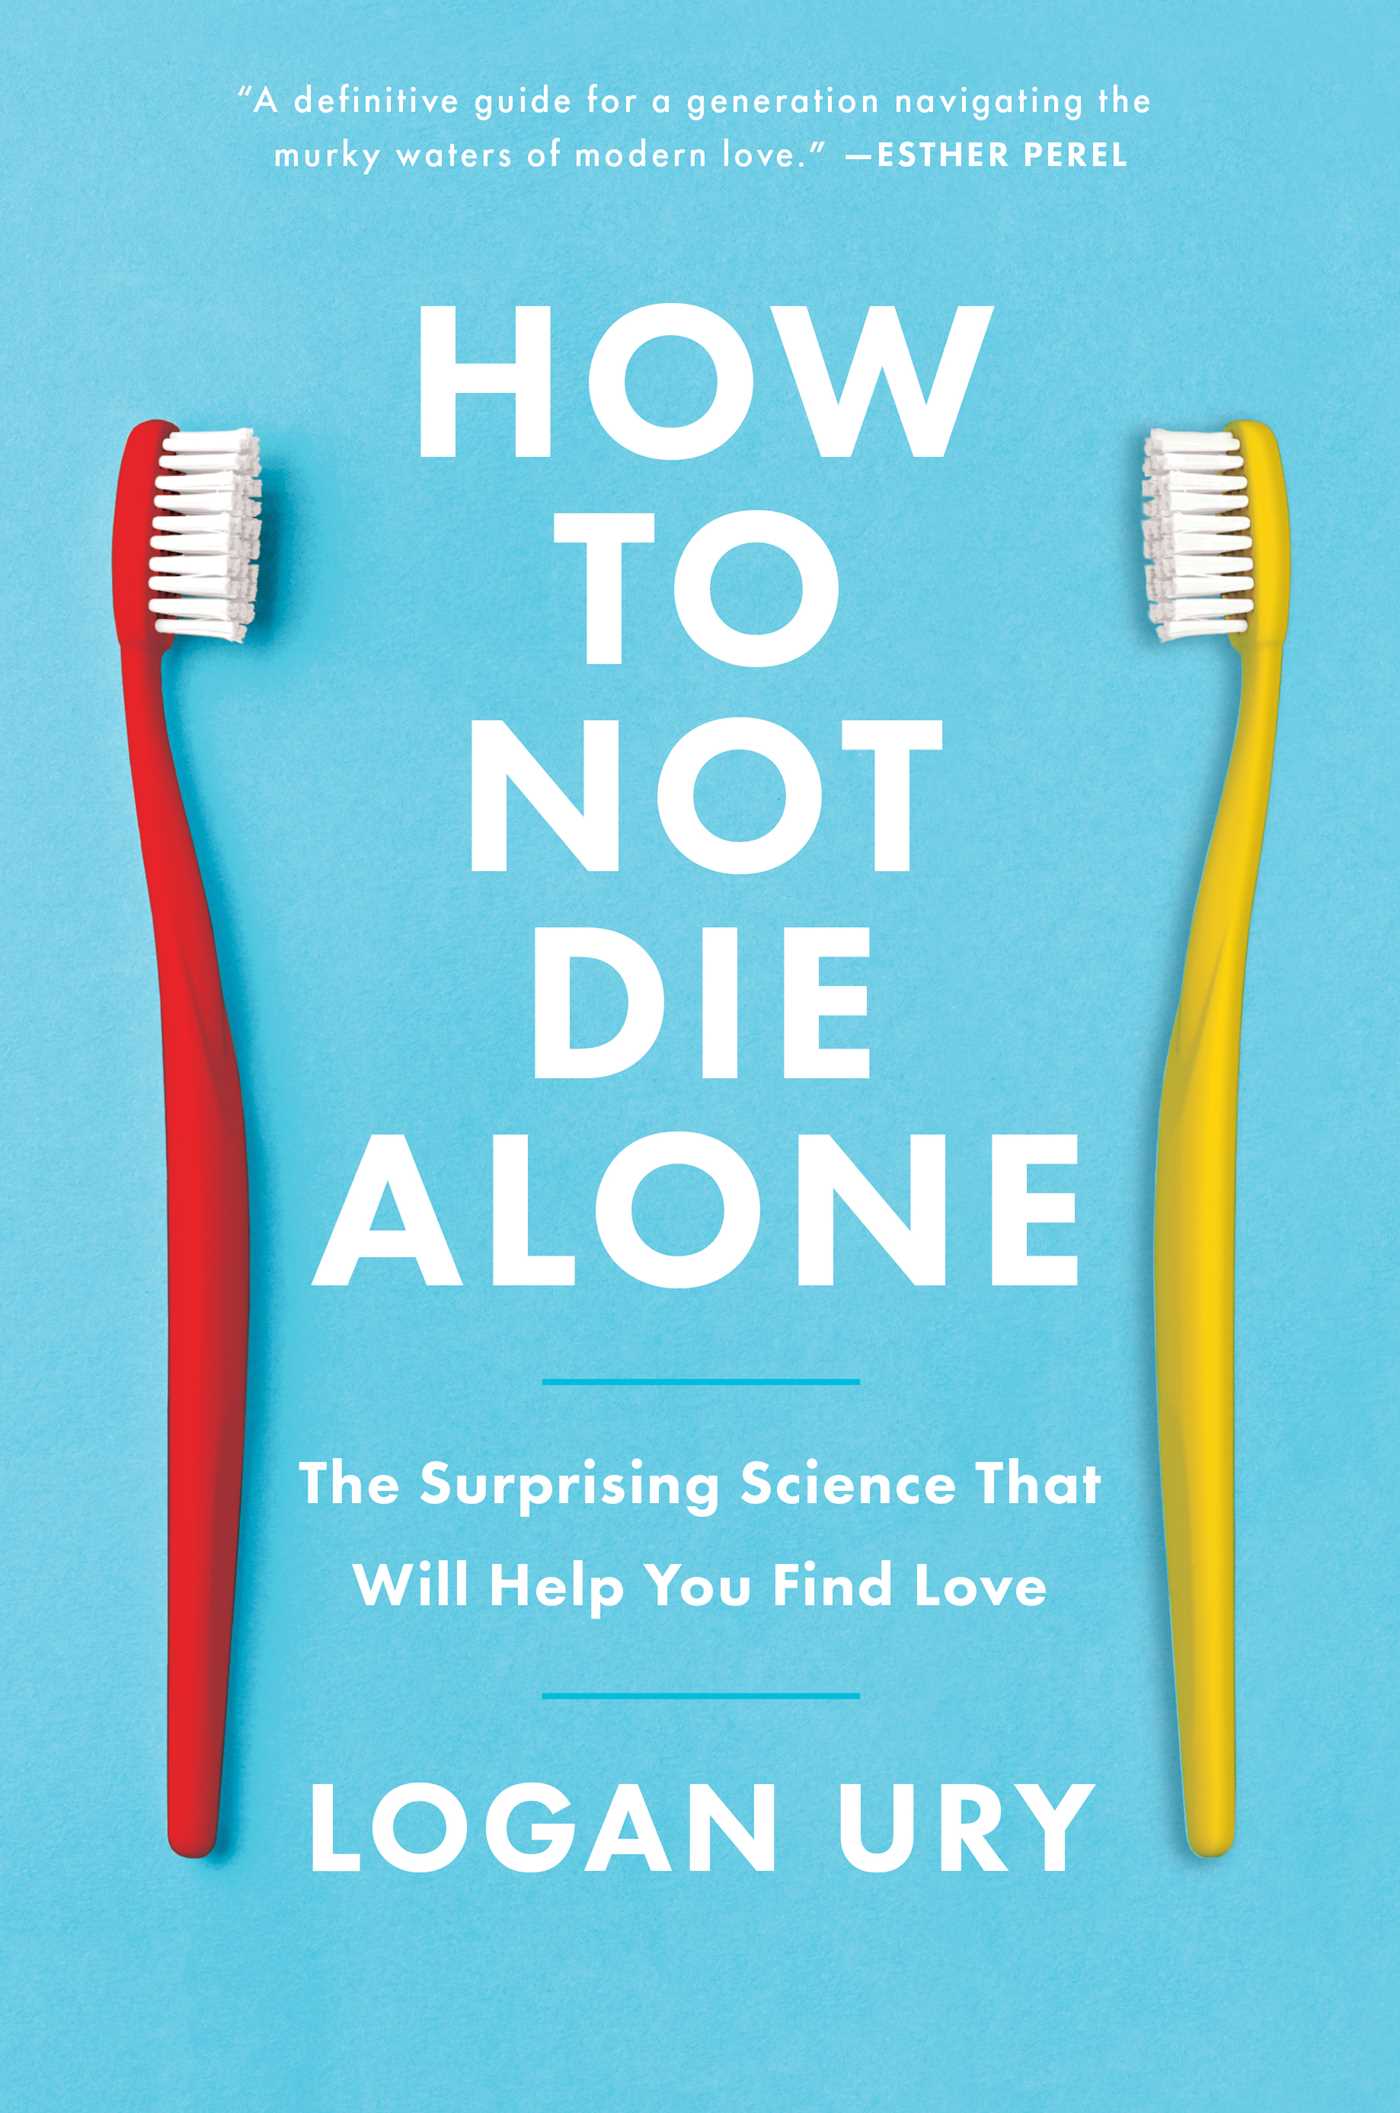 [Download] How to Not Die Alone by Logan Ury  pdf book